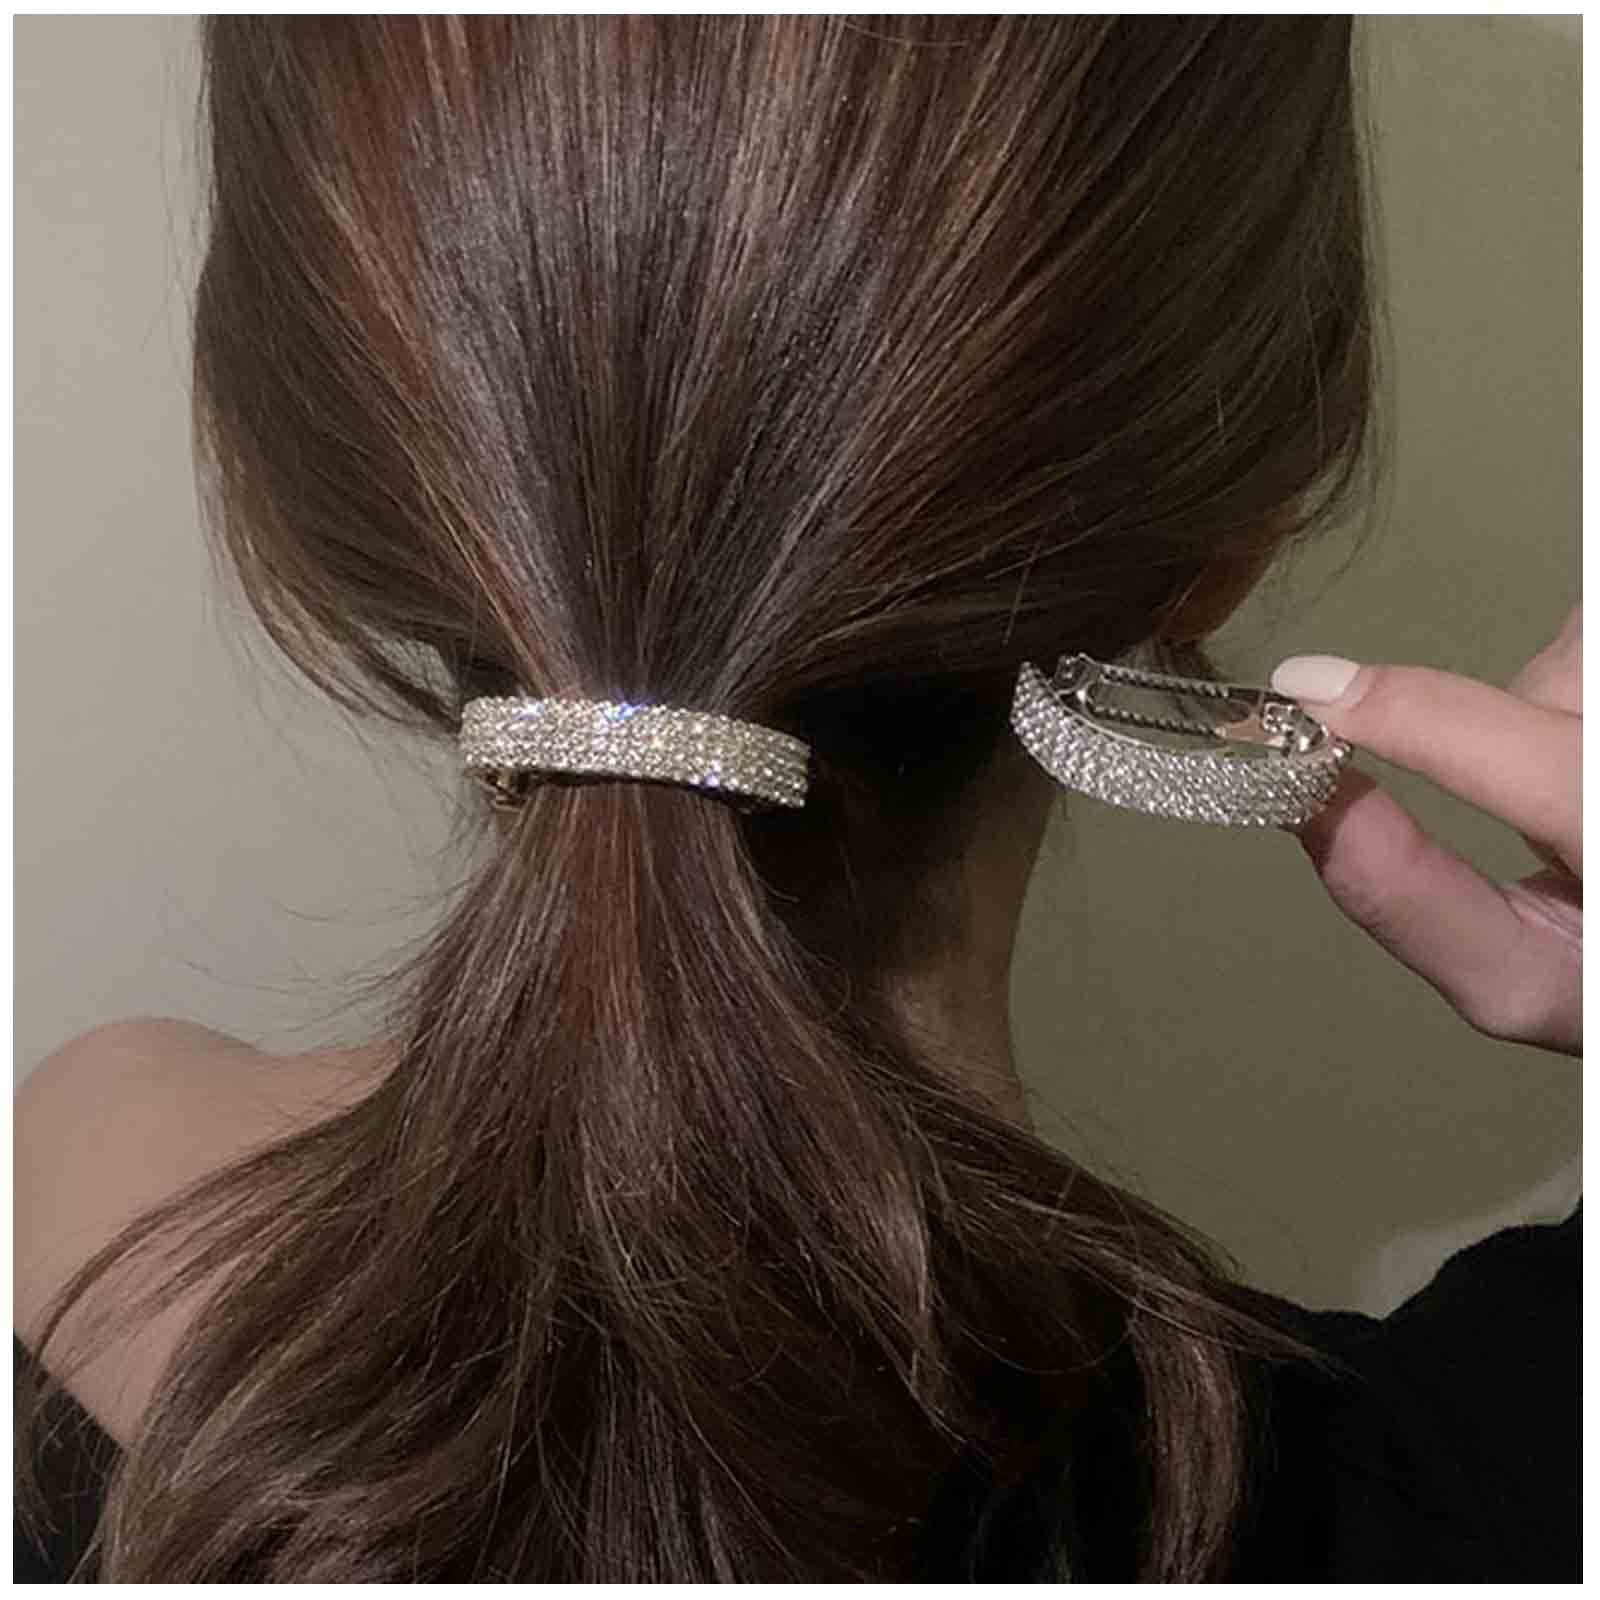 Amazon.com : LOVEF 2 Pcs Korean Style Hair Jewelry Gold Plated Crystal  Rhinestone Flower Elastic Ponytail Holder Hair Tie Rope Band Ring Rubber Band  Hair Accessories (Gold+Silver) : Beauty & Personal Care